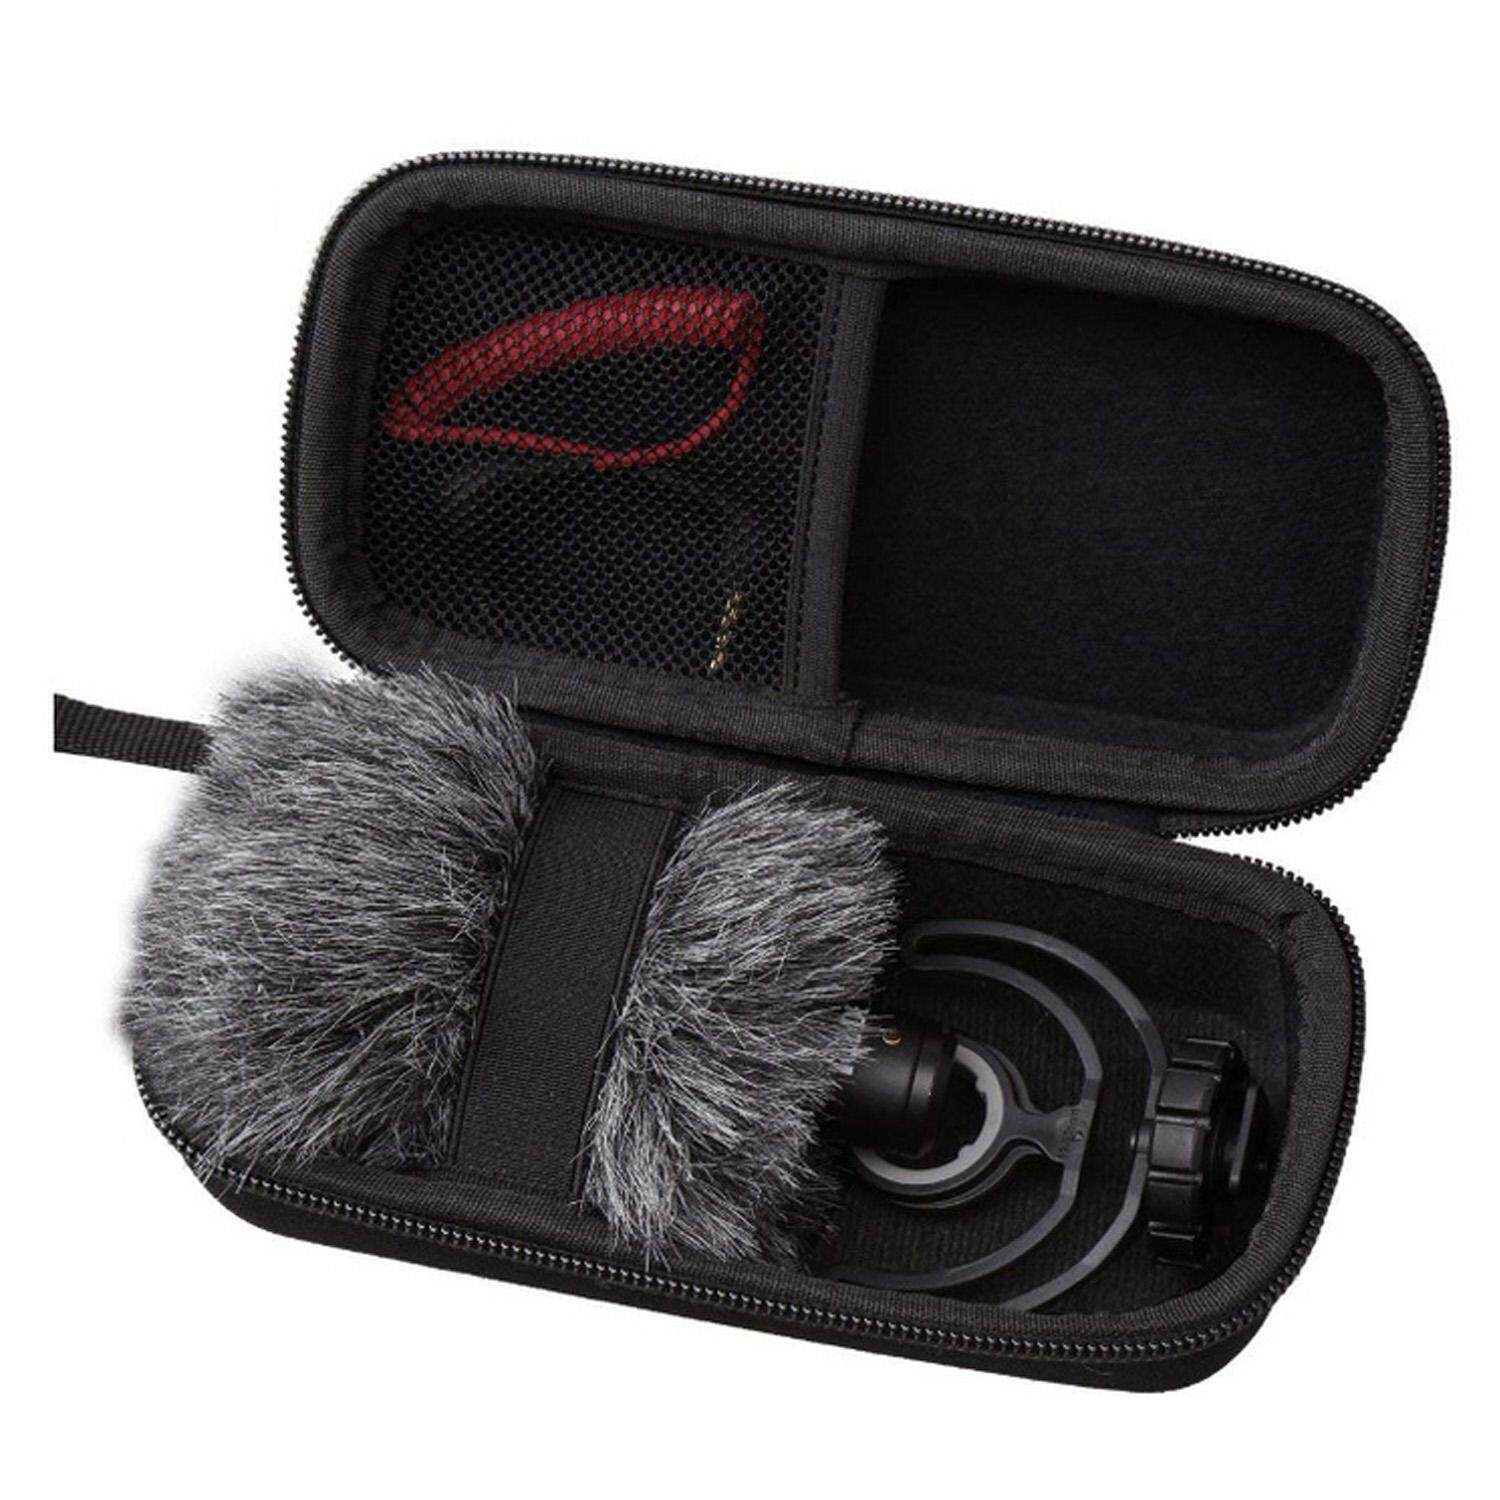 30x13x9cm Portable Waterproof Shockproof Protective Storage Carrying Case Bag for Handheld Wireless Microphone